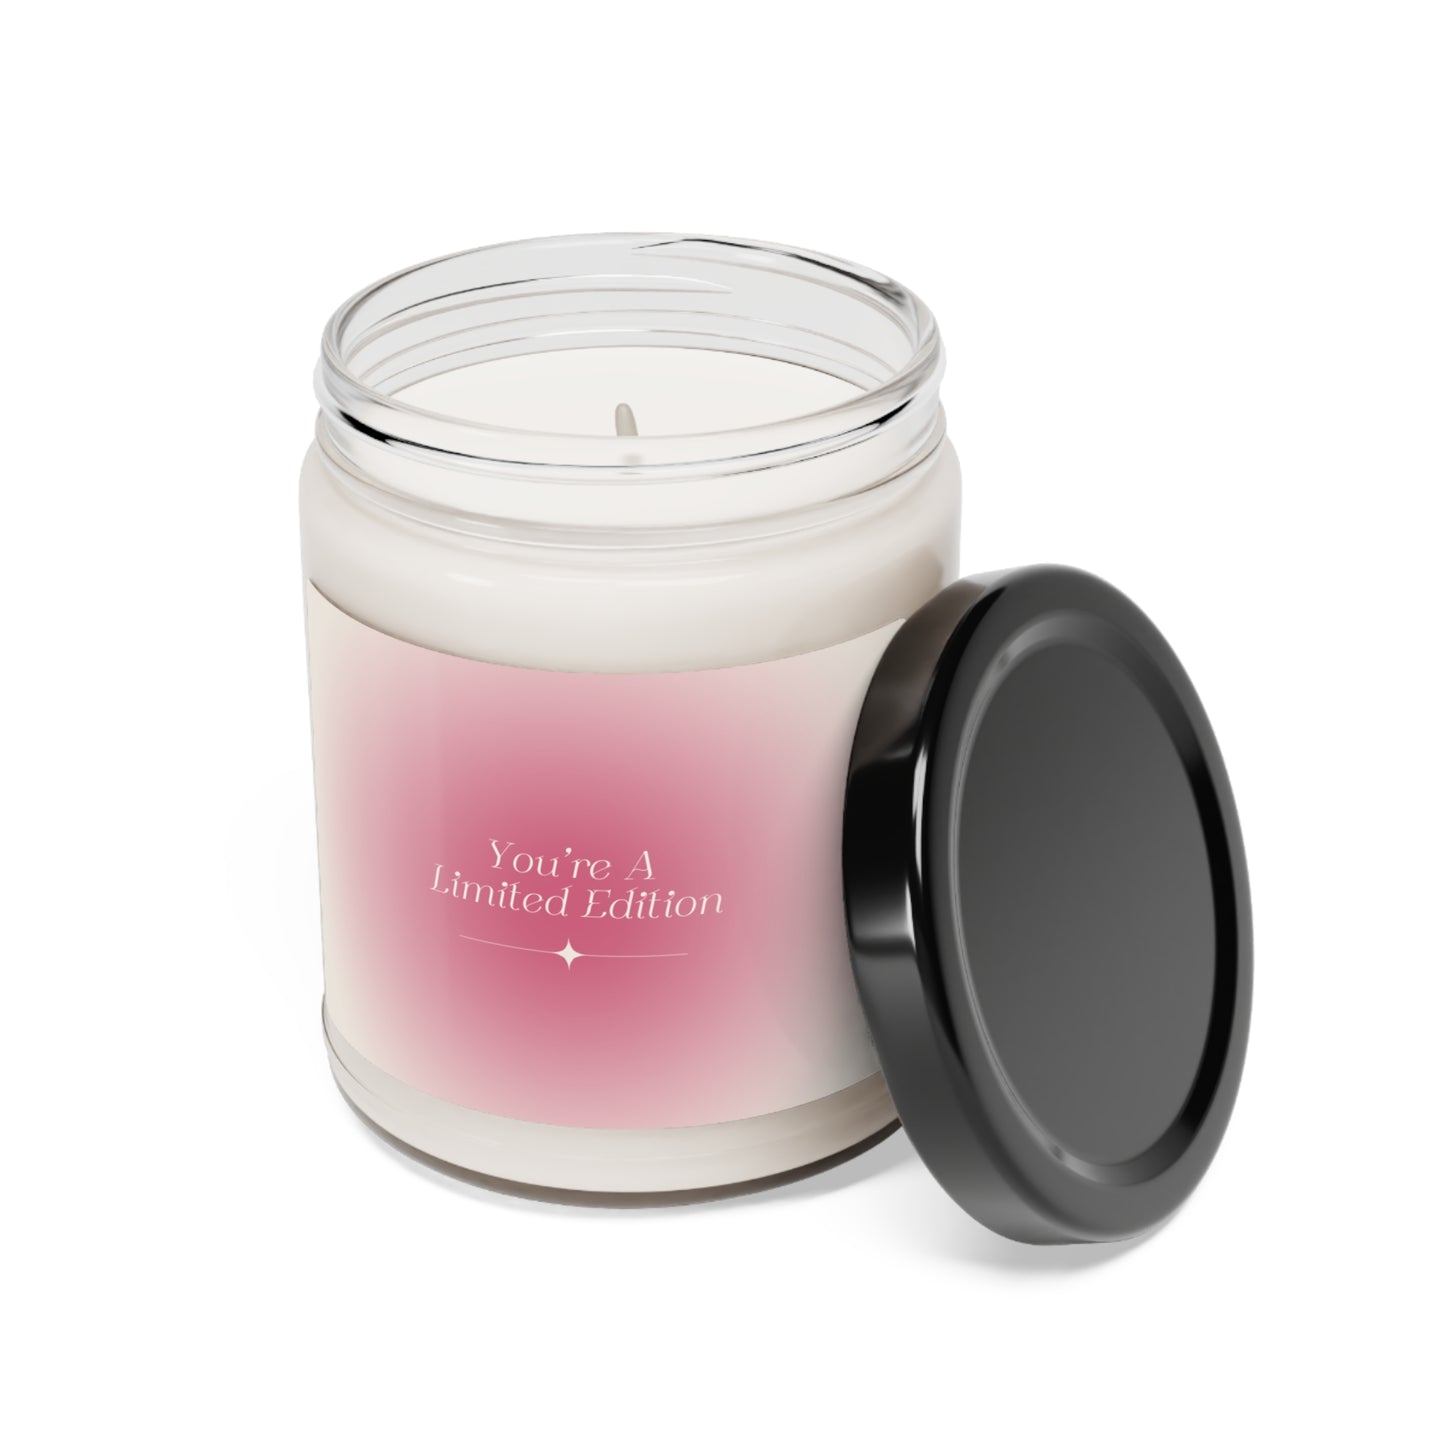 Limited Edition Scented Soy Candle, 9oz